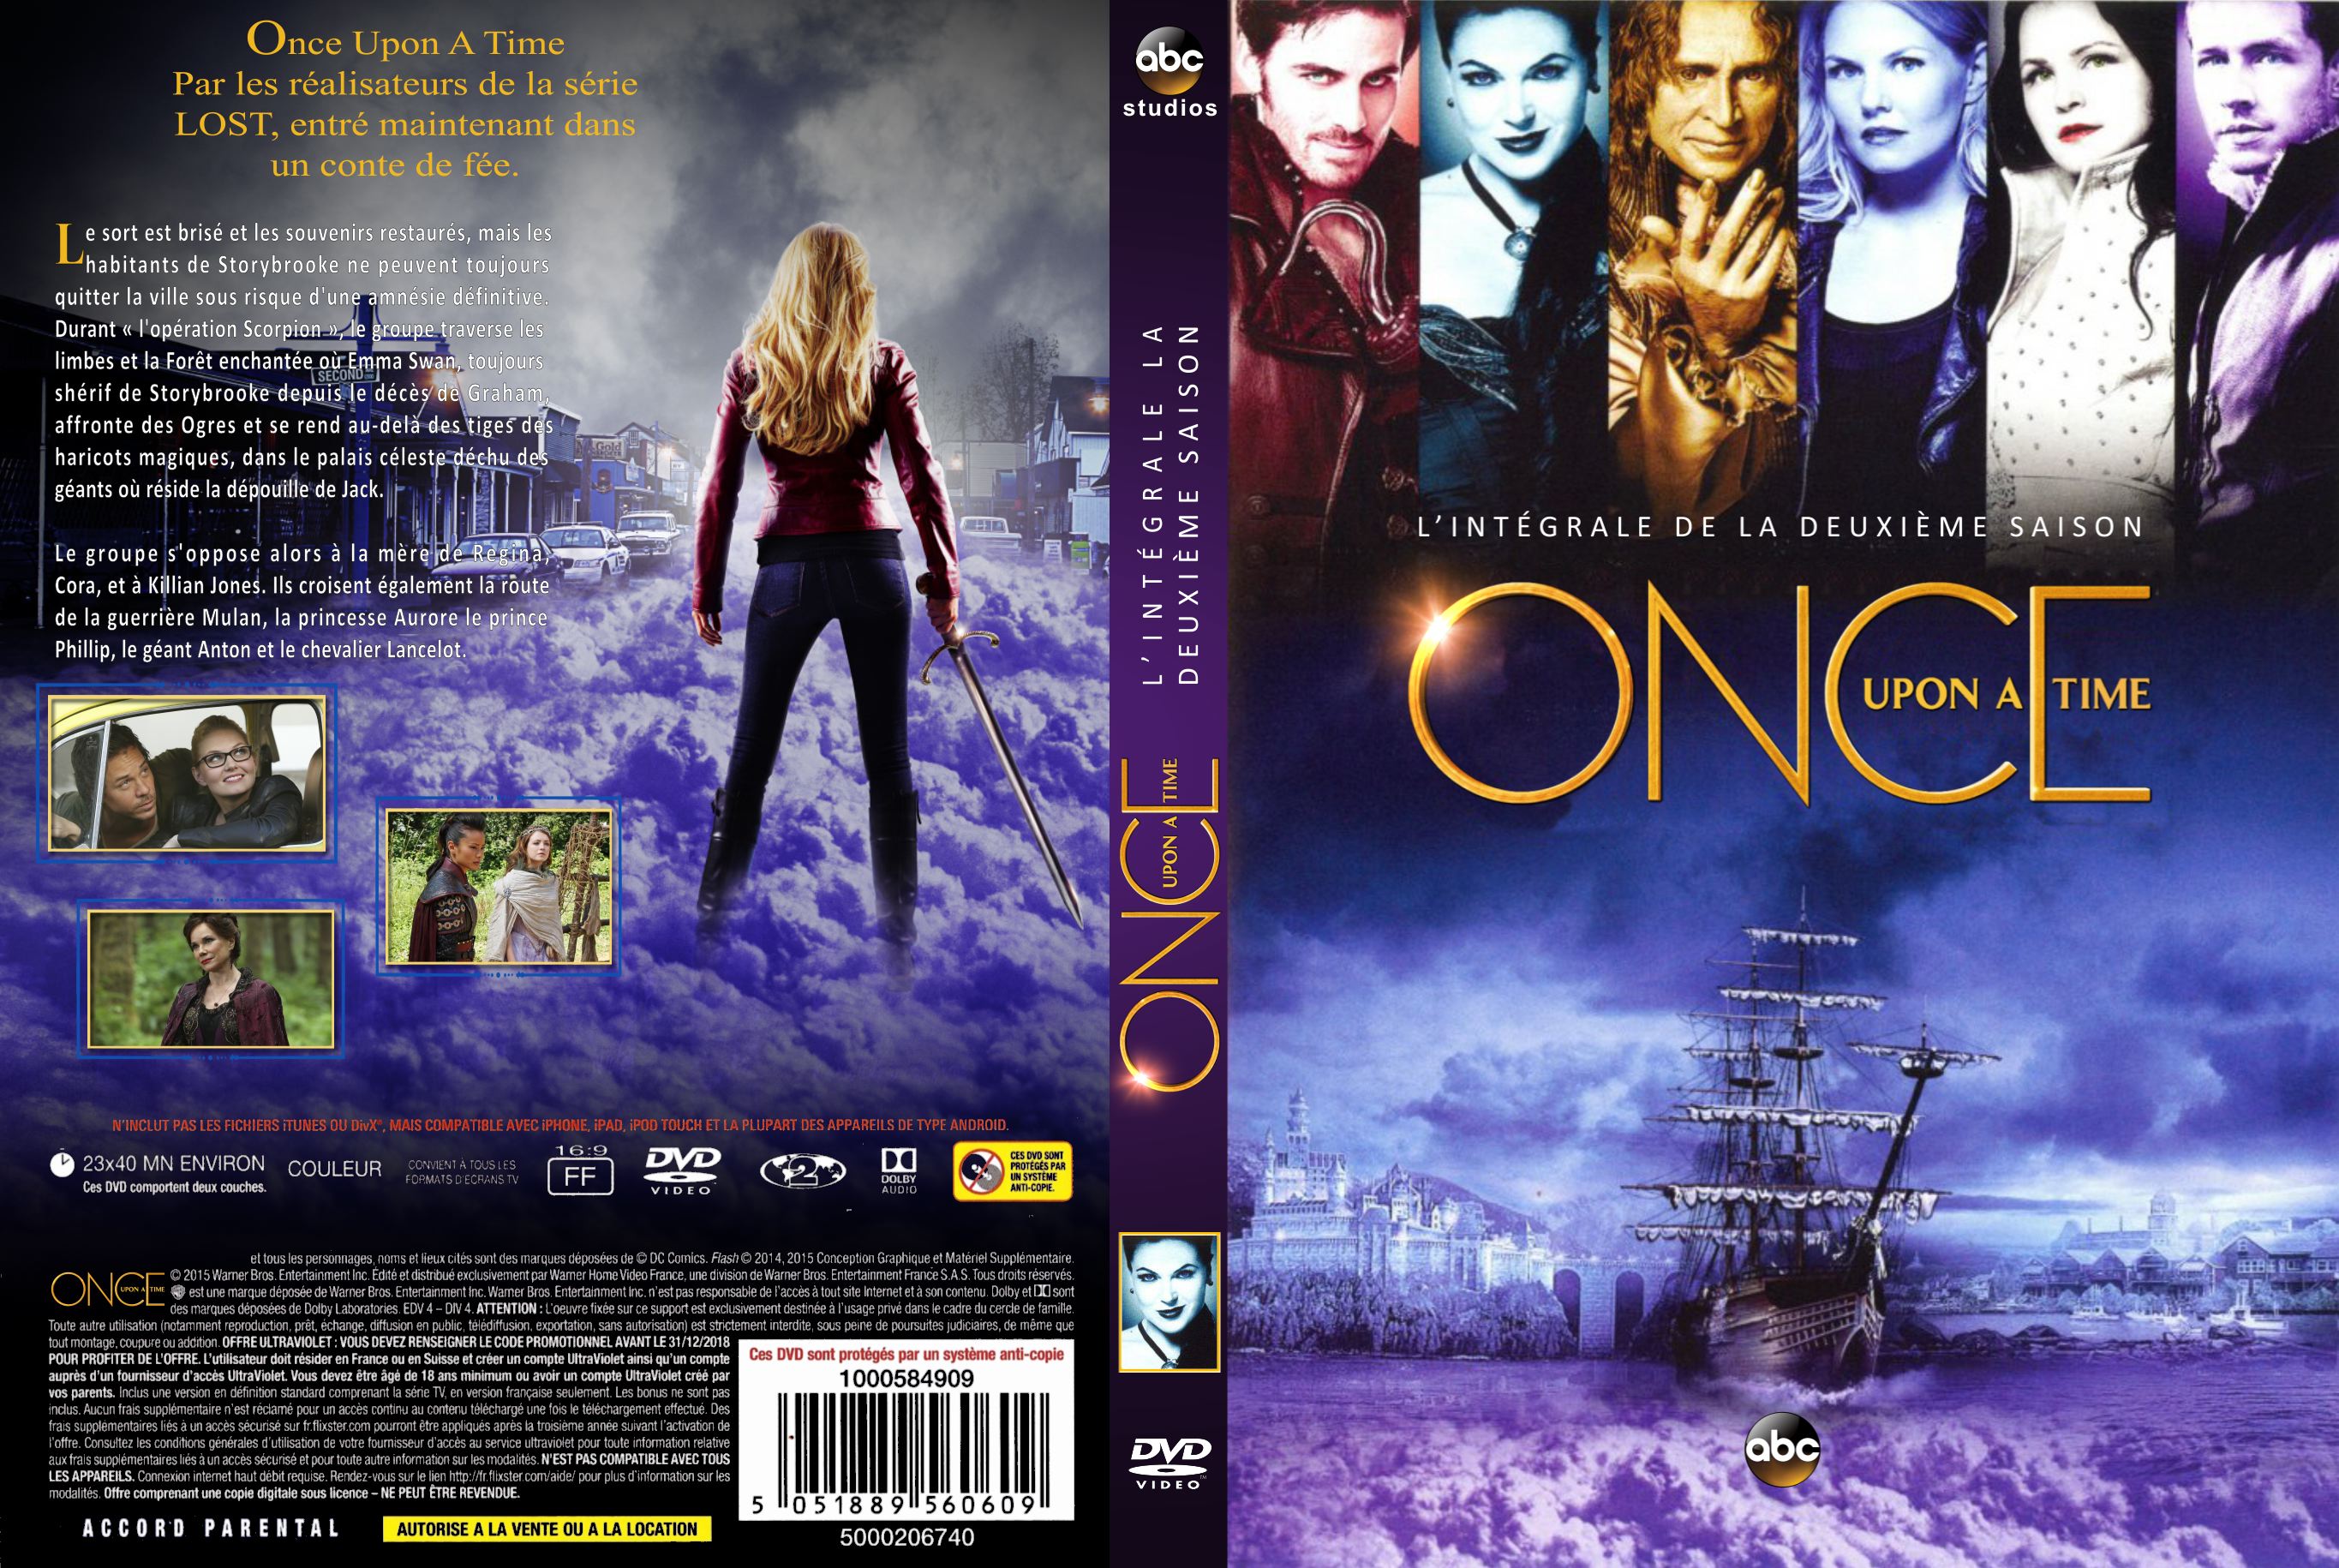 Jaquette DVD Once Upon a Time saison 2 custom